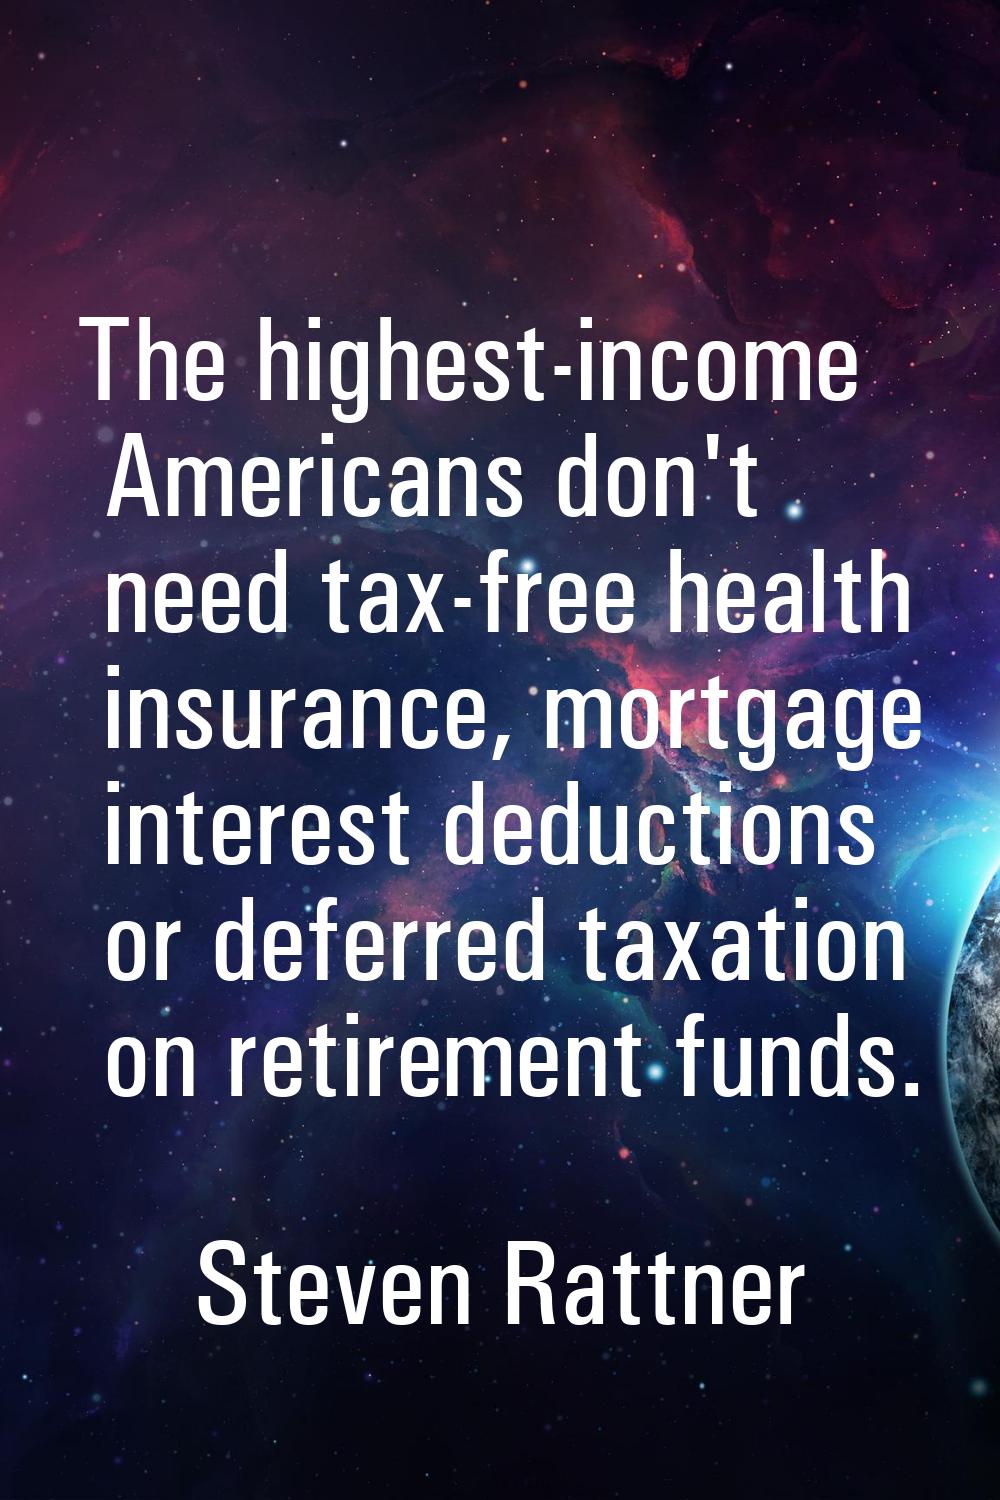 The highest-income Americans don't need tax-free health insurance, mortgage interest deductions or 